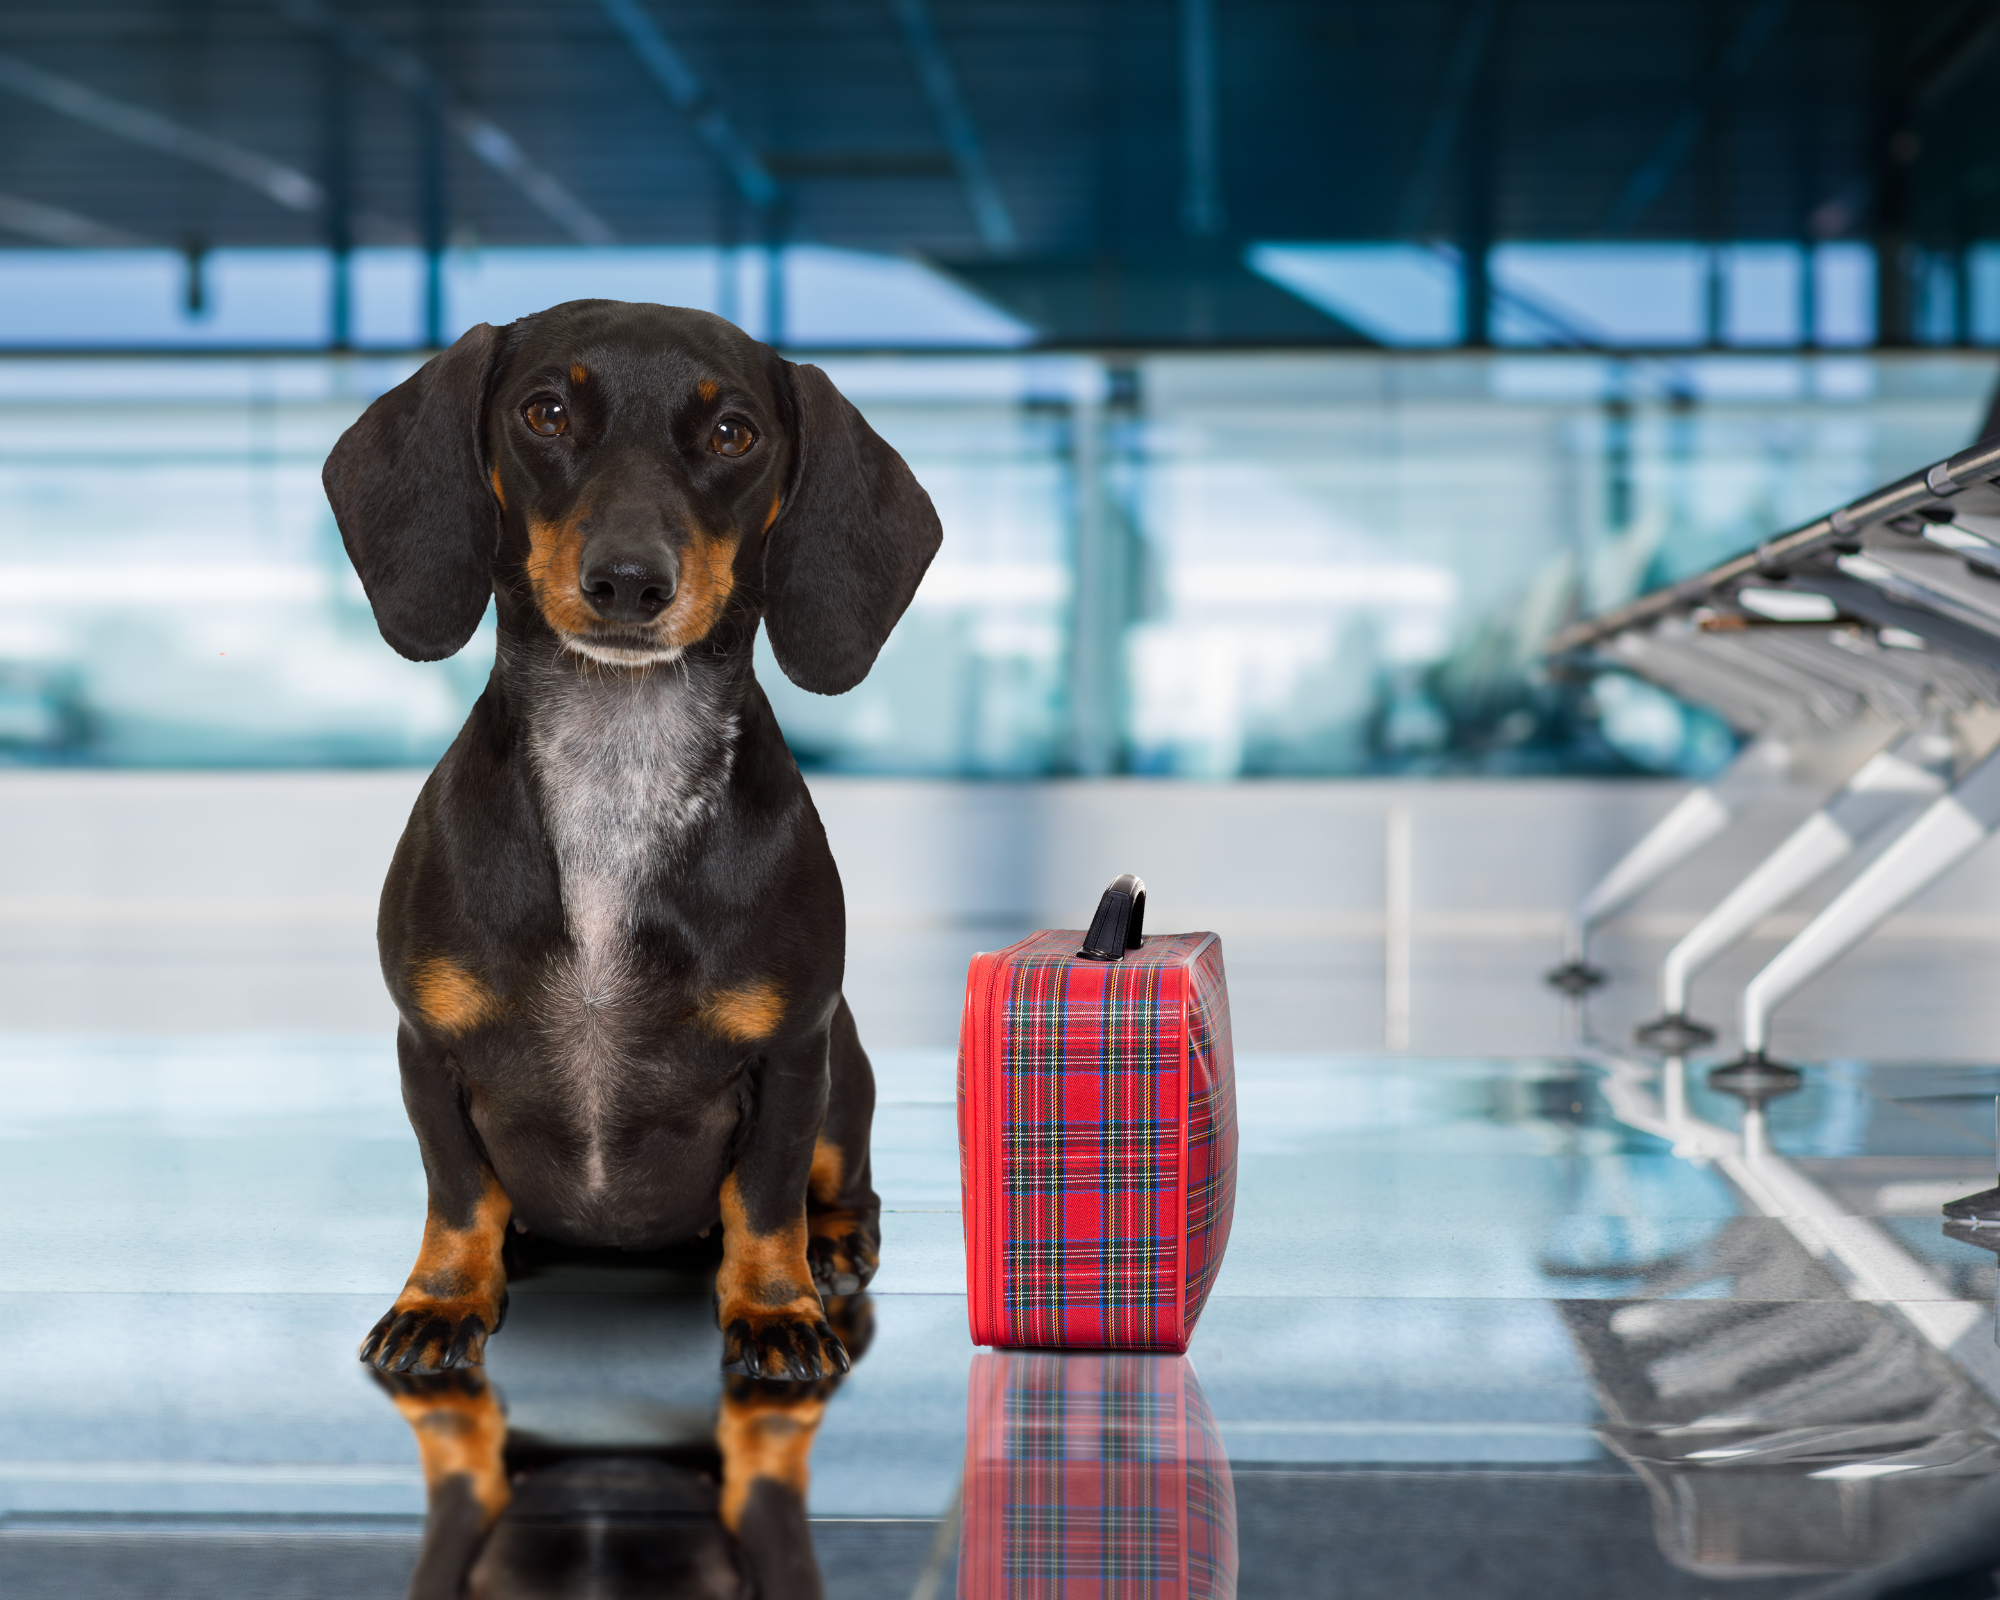 Dachshund sitting next to small red luggage in airport